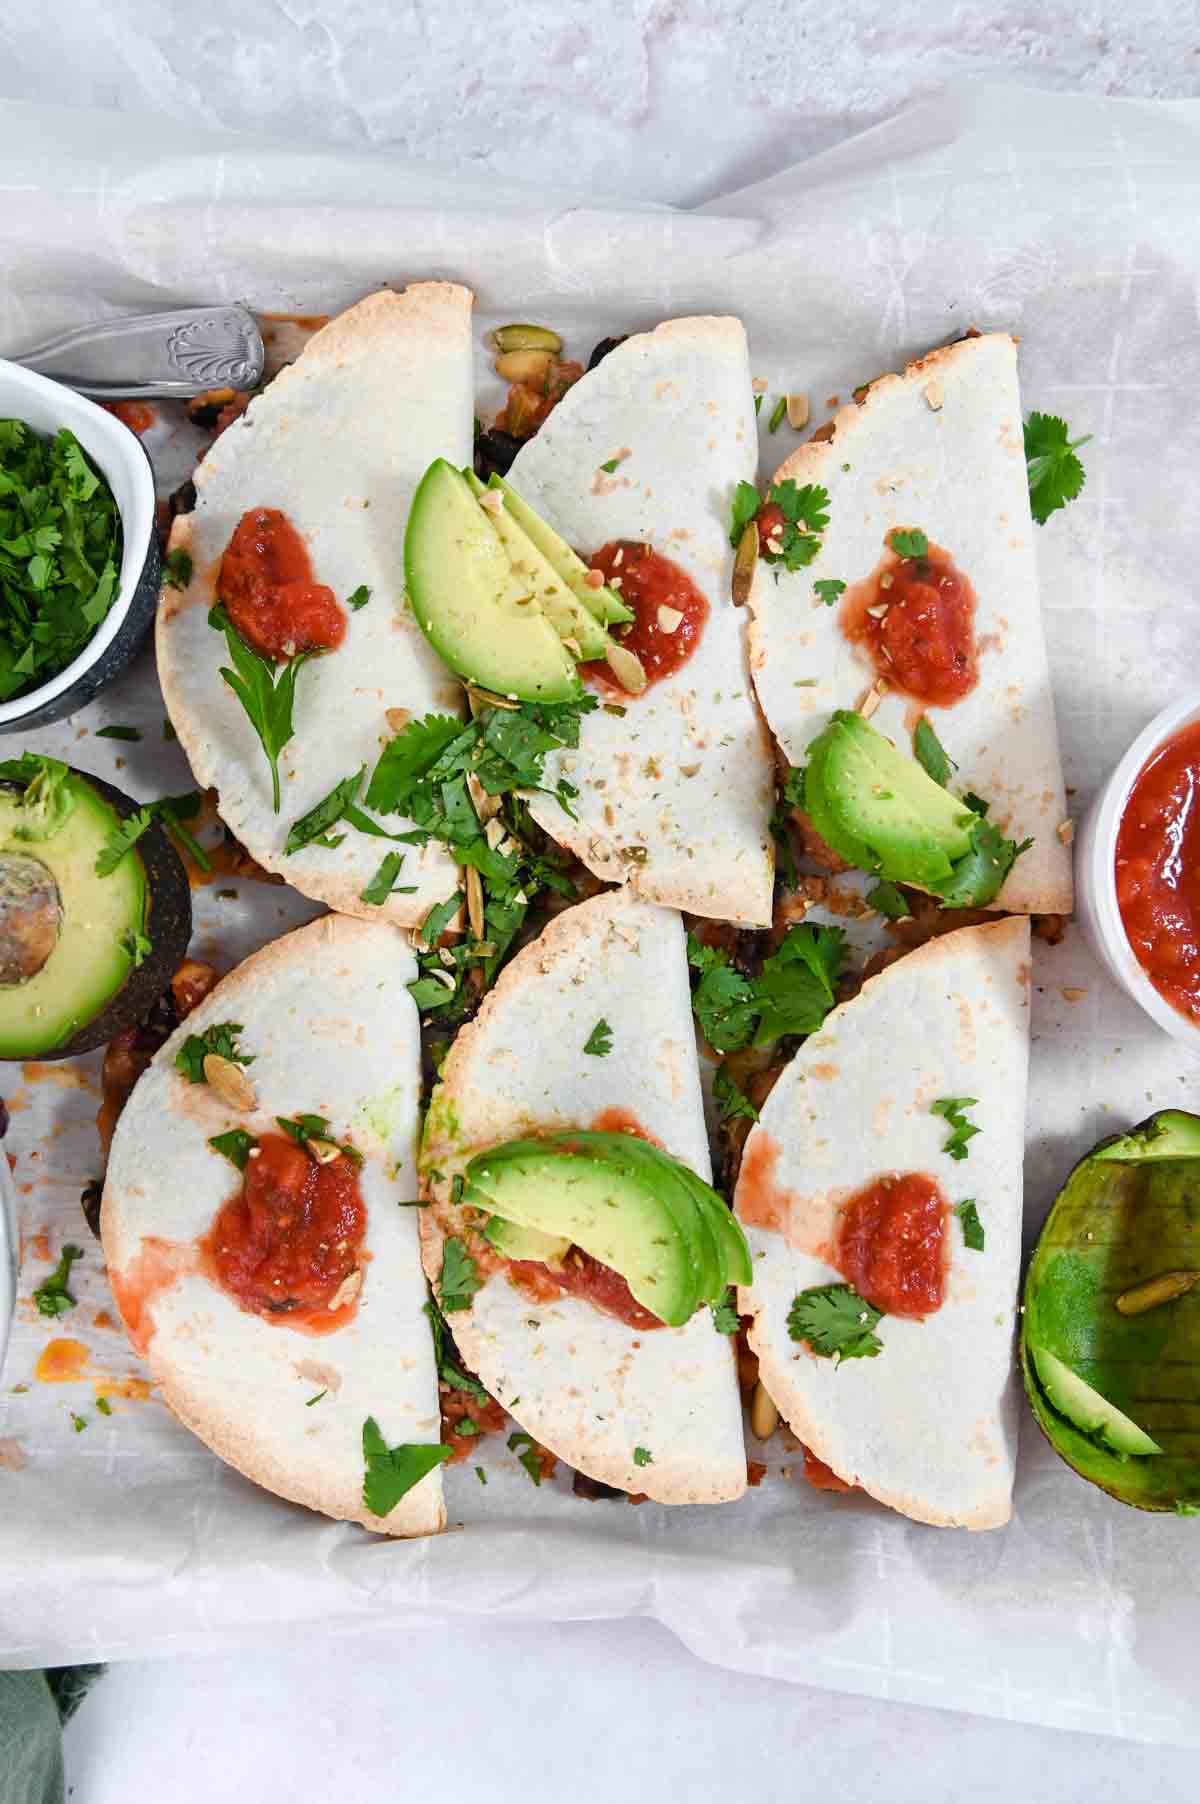 Overhead view of six baked tacos topped with avocado slices and salsa.